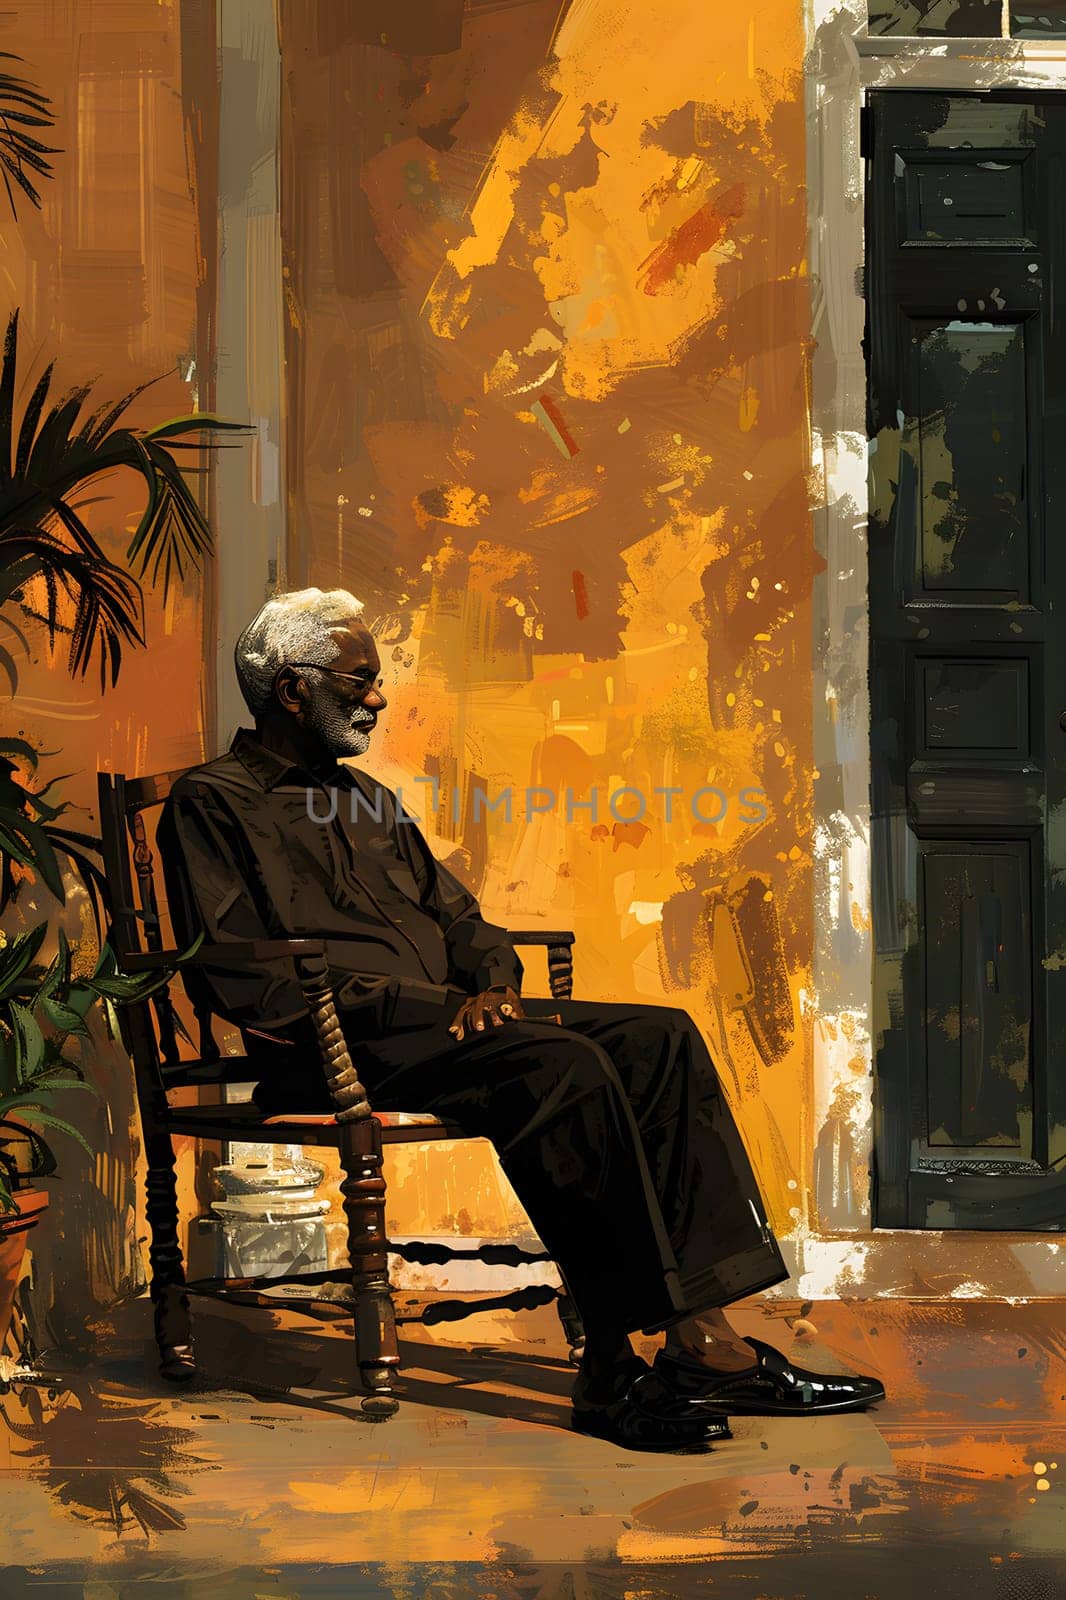 A visual arts event showcasing a painting of an artist sitting in a rocking chair, captured in tints and shades with a plant in the background